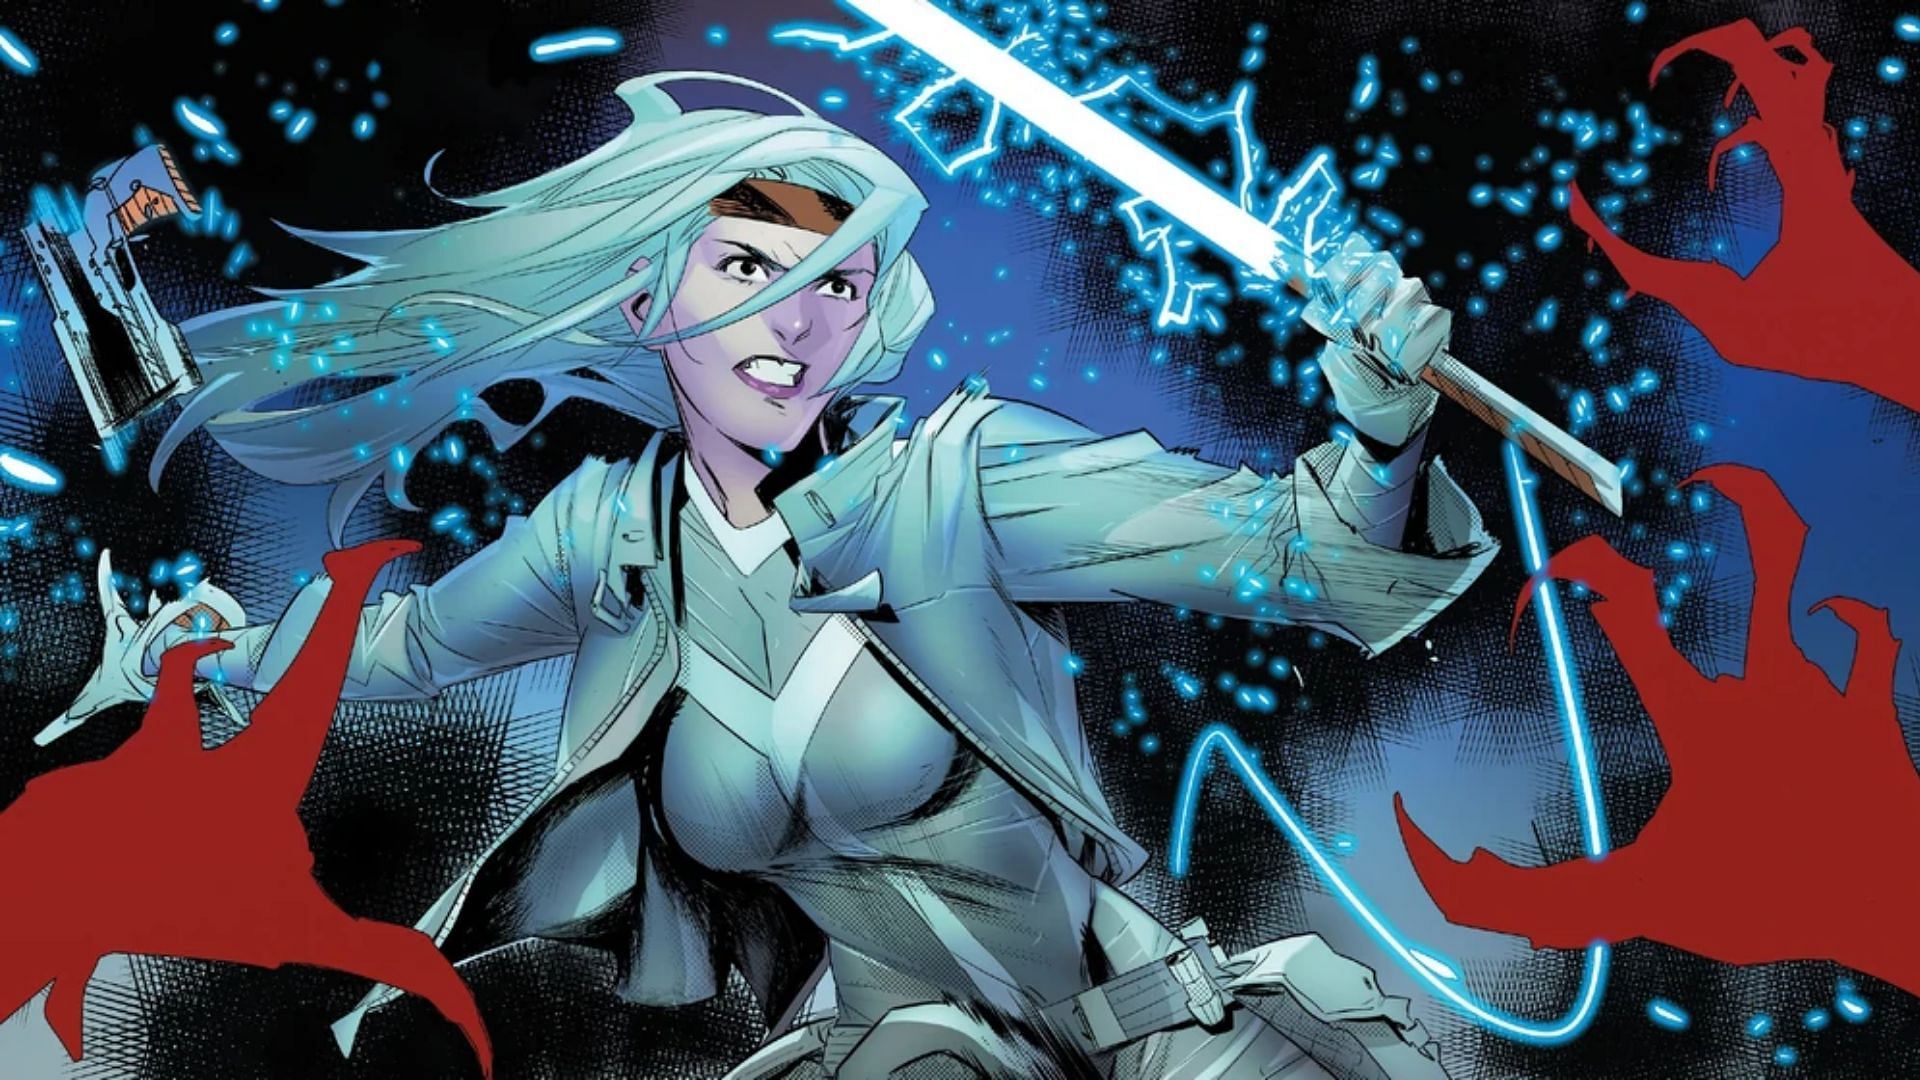 Silver Sable in Absolute Carnage Miles Morales #2 (Image via Marvel)